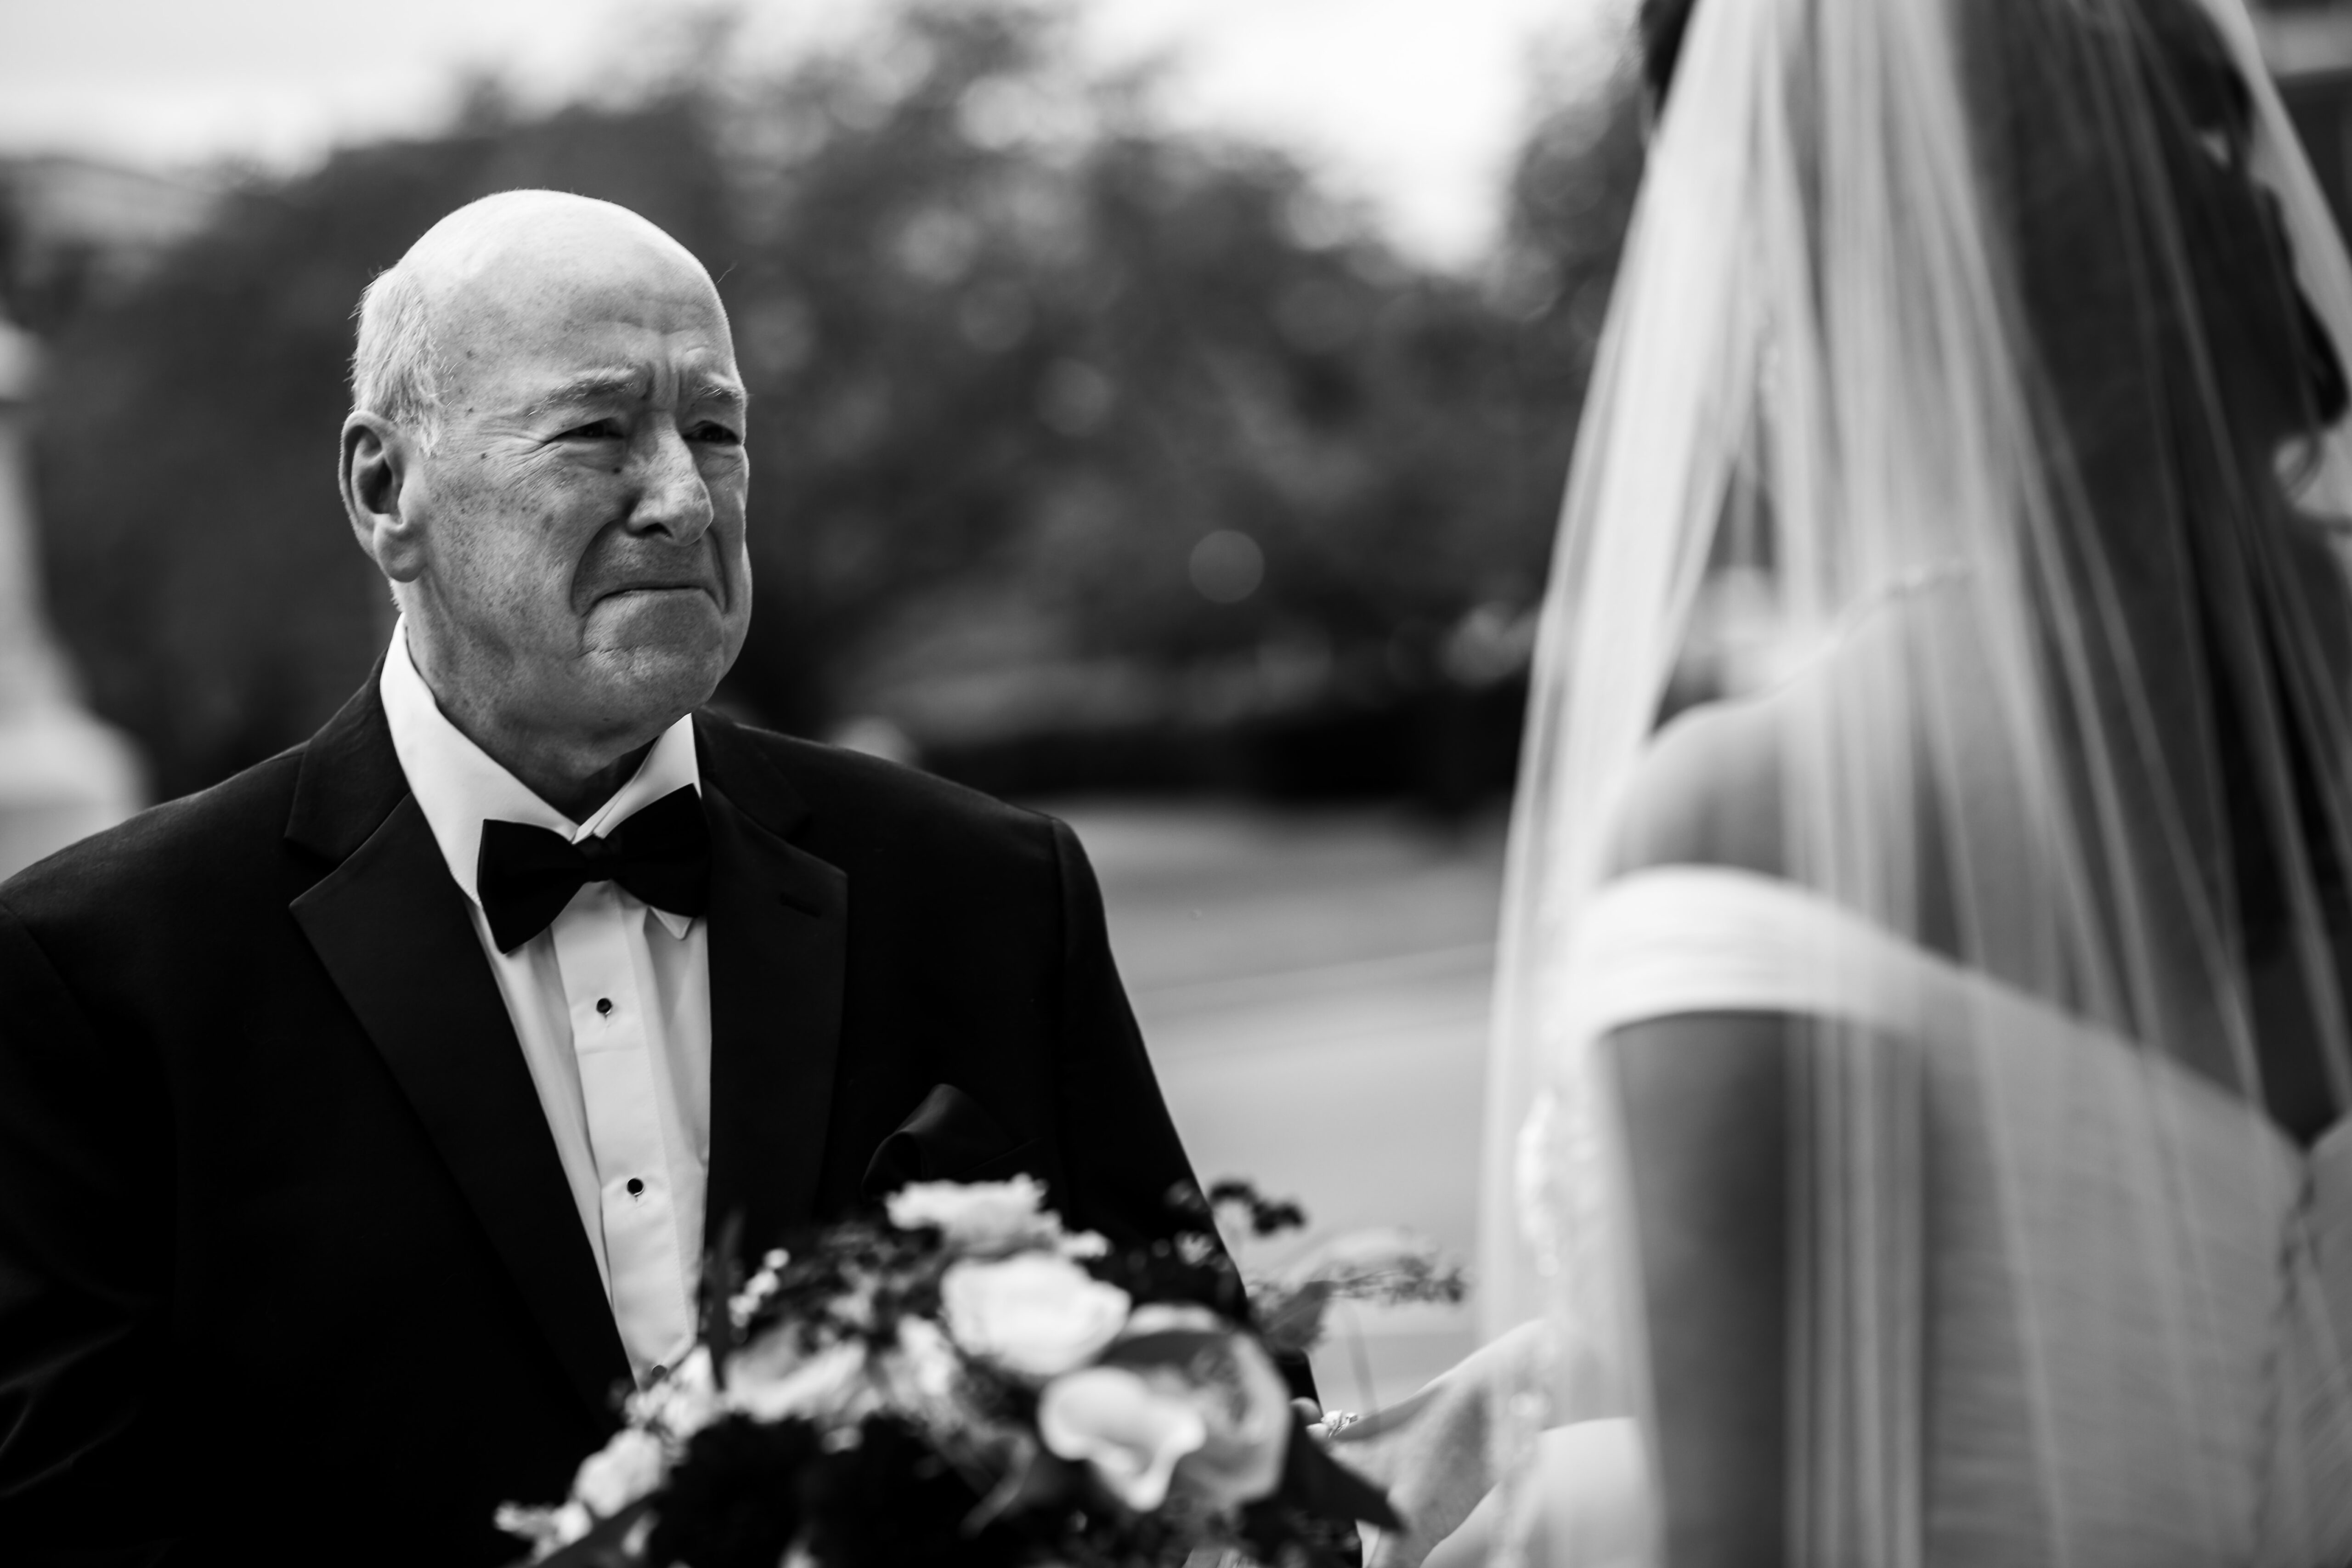 Authentic DC Wedding Photographer, Lisa Rhinehart, captures this authentic image of the father of the bride as he sees her wearing her gown for the first time with tears in his eyes